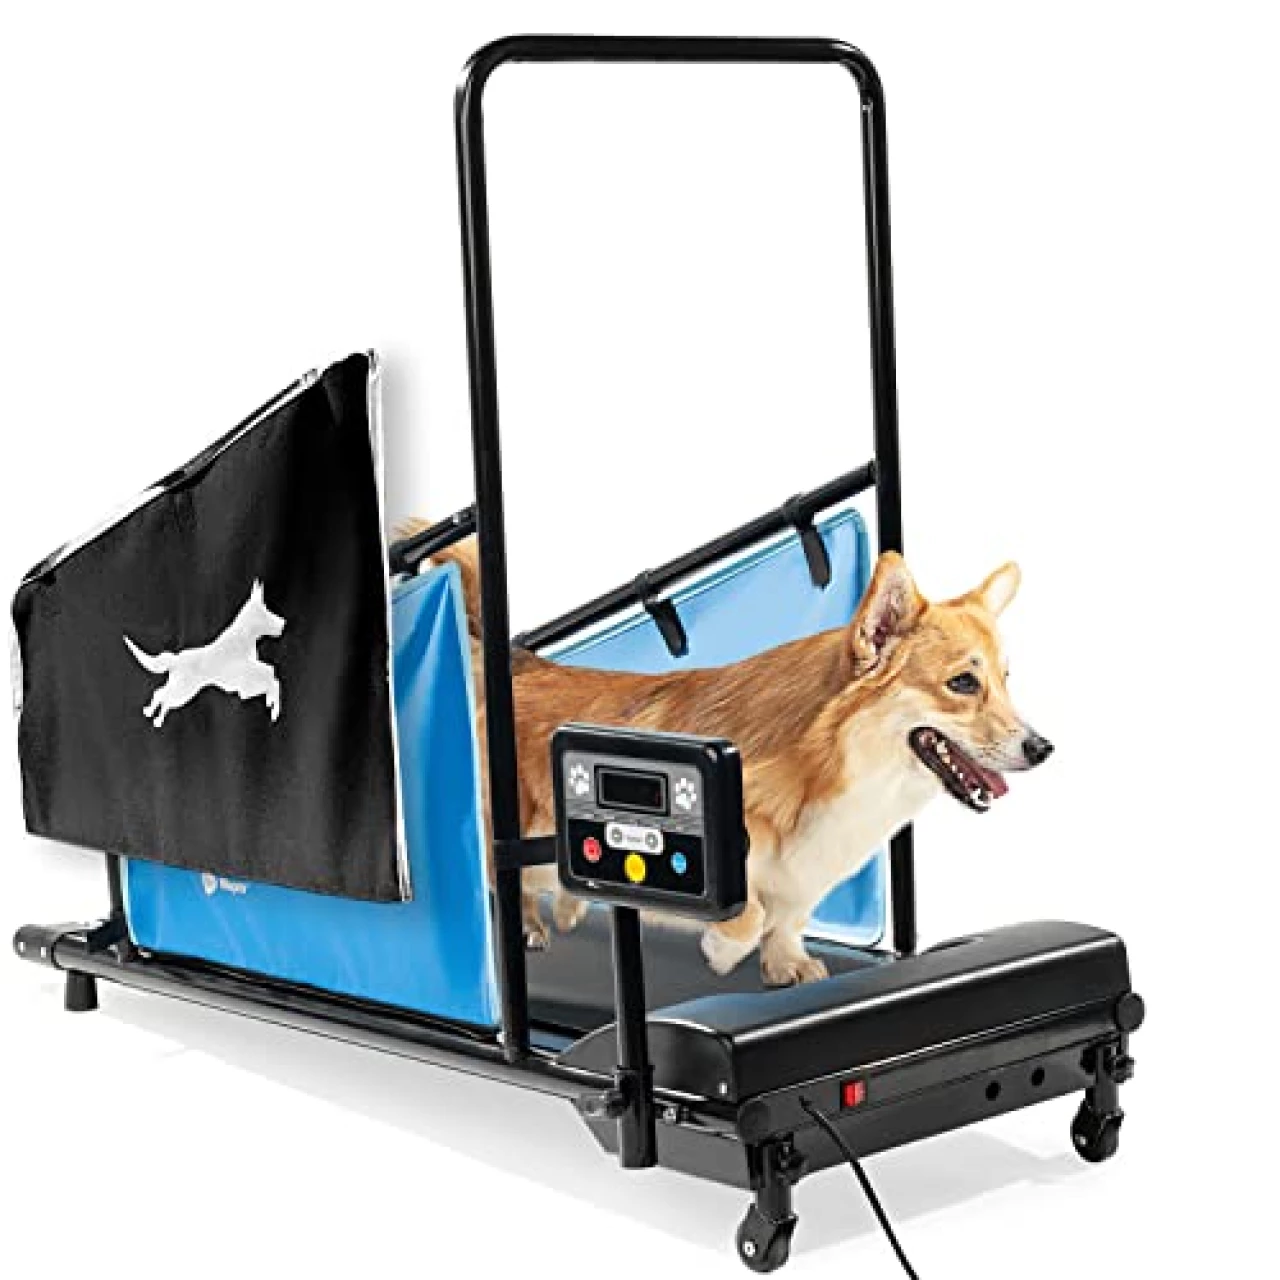 LifePro Small Dogs Treadmill for Medium Dogs - Dog Pacer Treadmill for Healthy &amp; Fit Pets - Dog Treadmill Run Walk for Indoor Training for Dogs up to 130 lbs